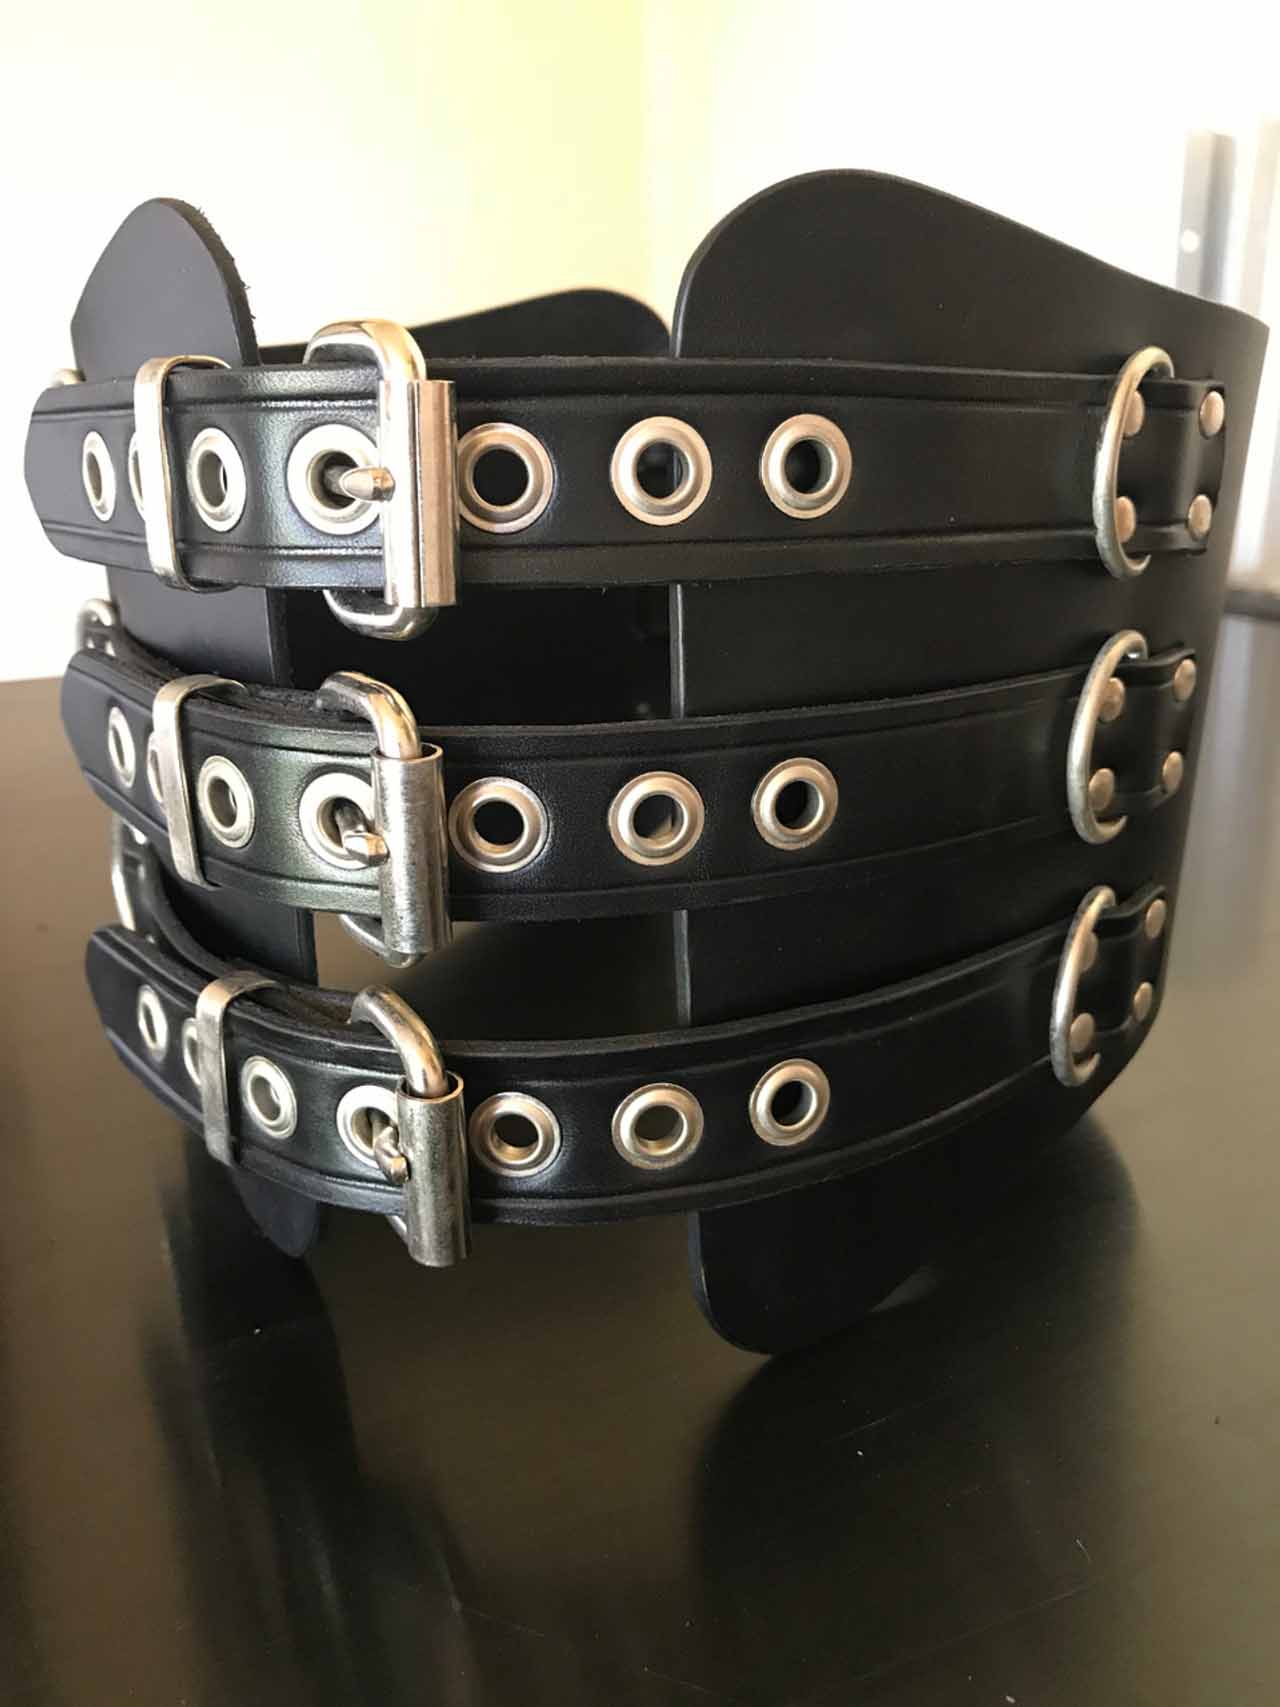 The back of the Leather Kidney Belt with Back Laces.